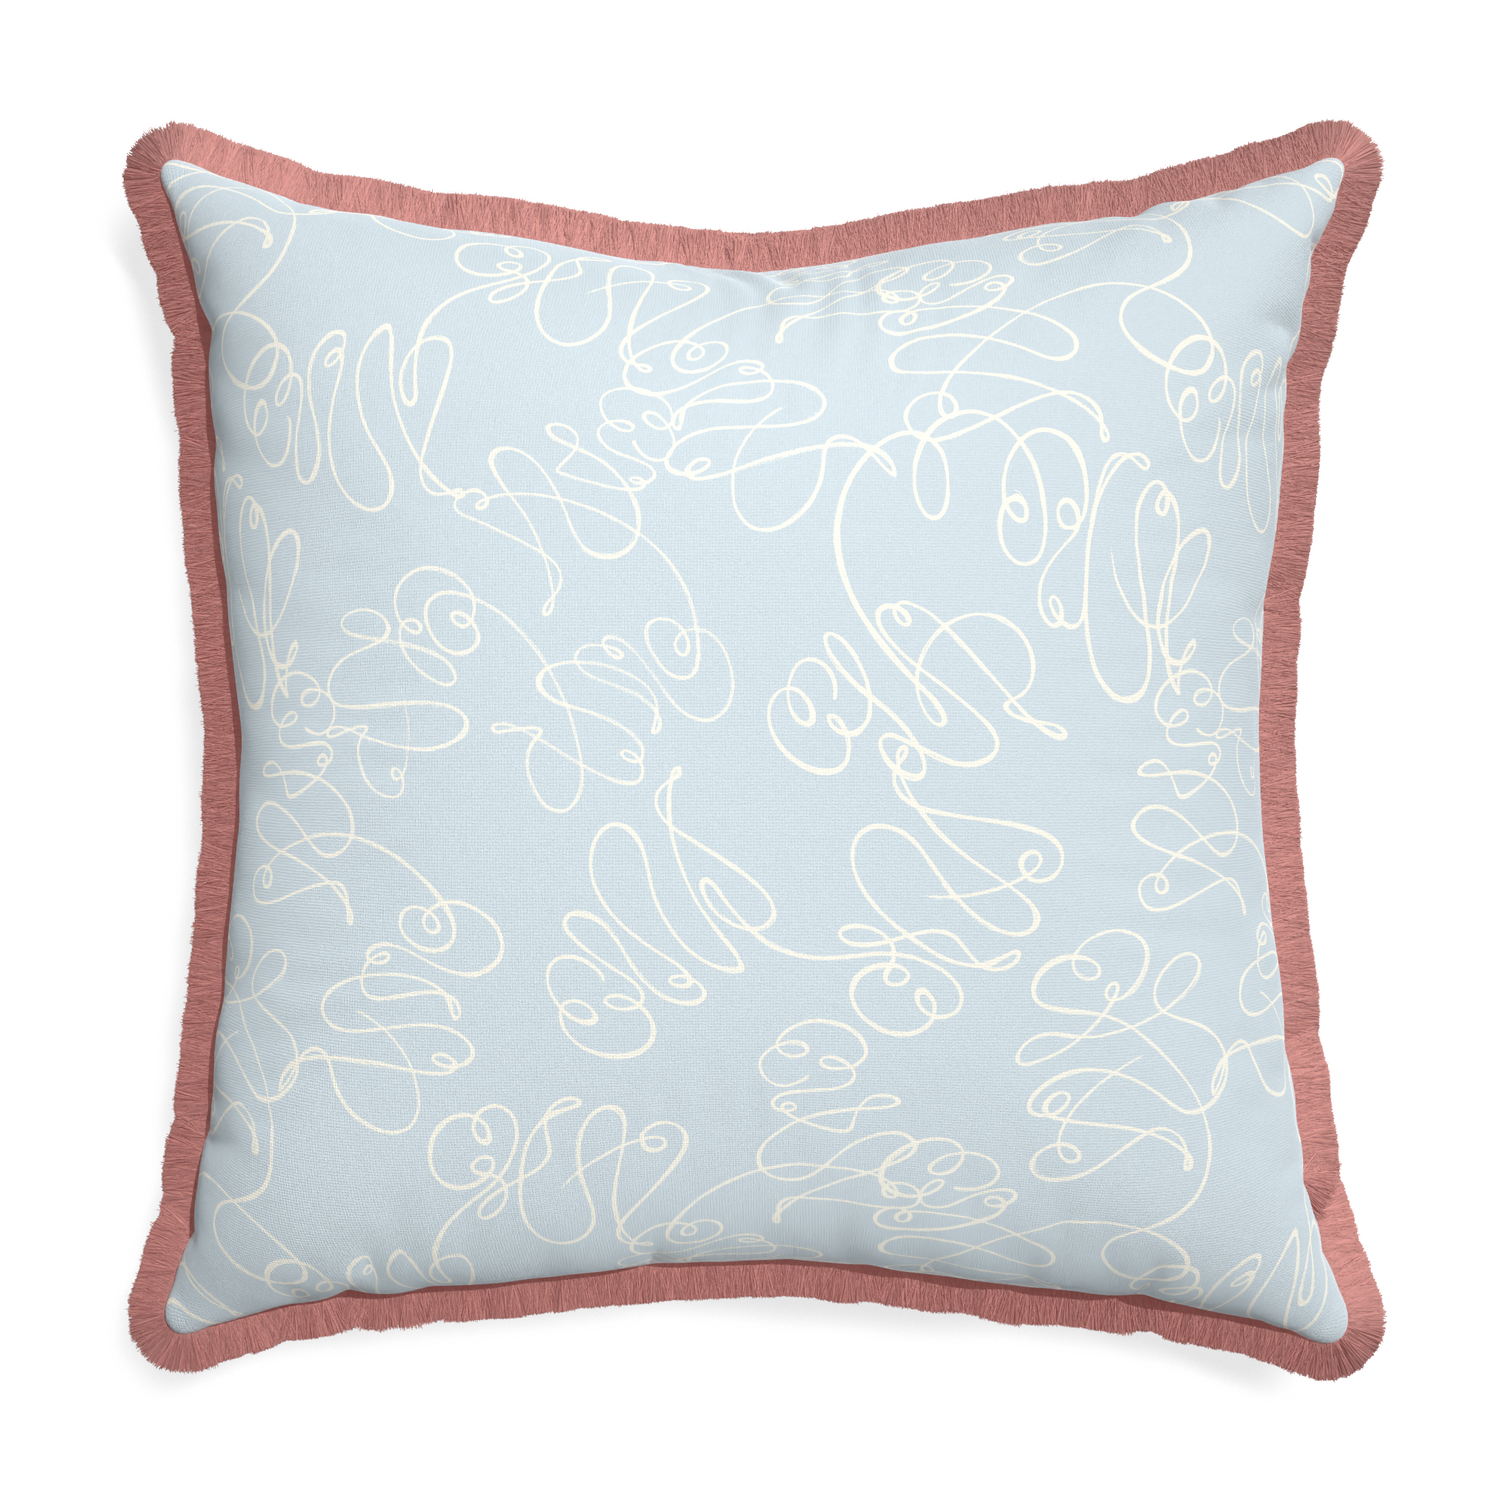 Euro-sham mirabella custom powder blue abstractpillow with d fringe on white background